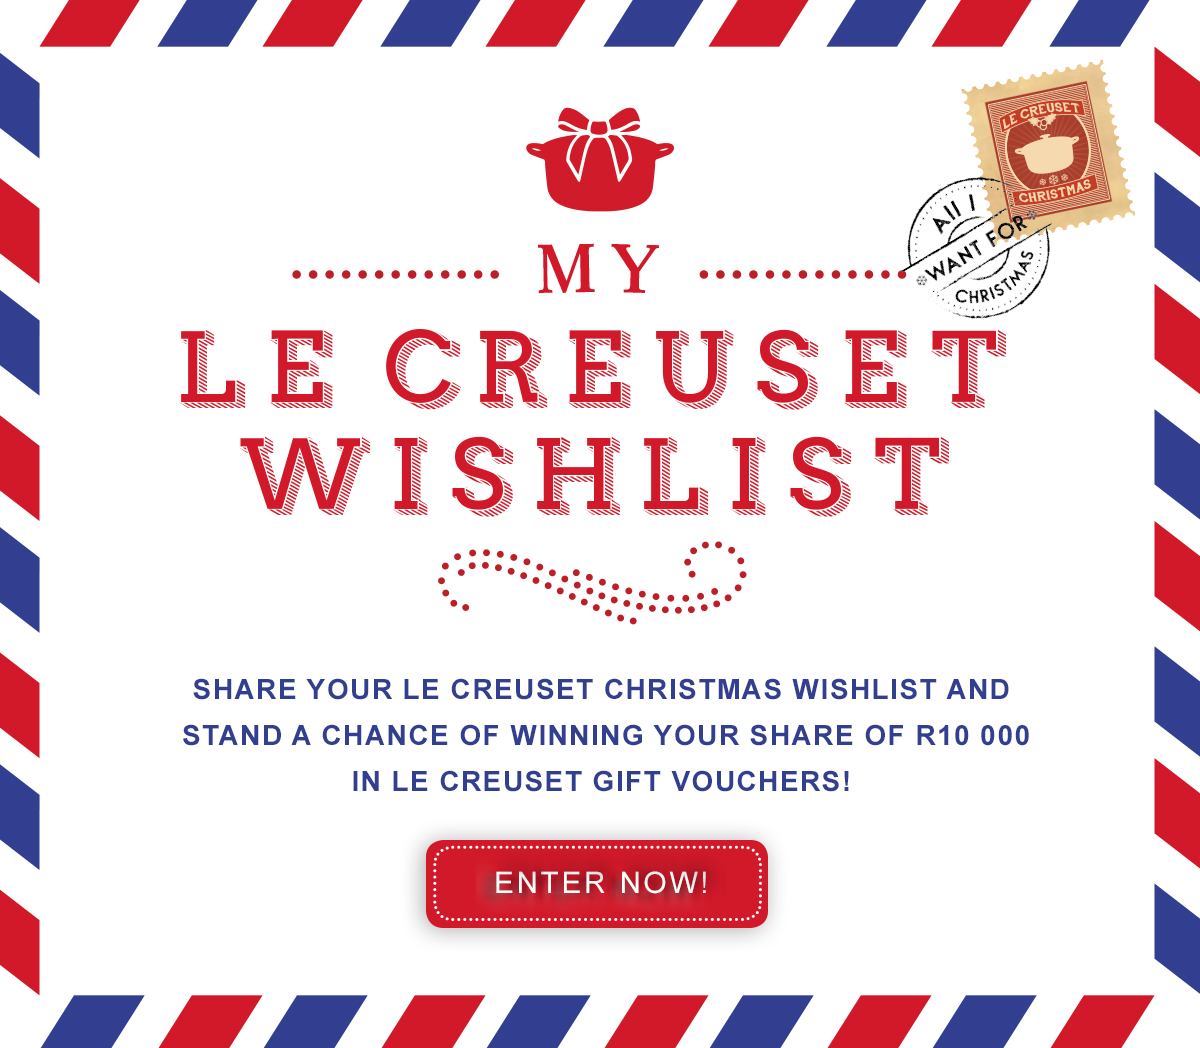 Le Creuset | Win Your Share of R10 000 in Le Creuset Gift Vouchers!